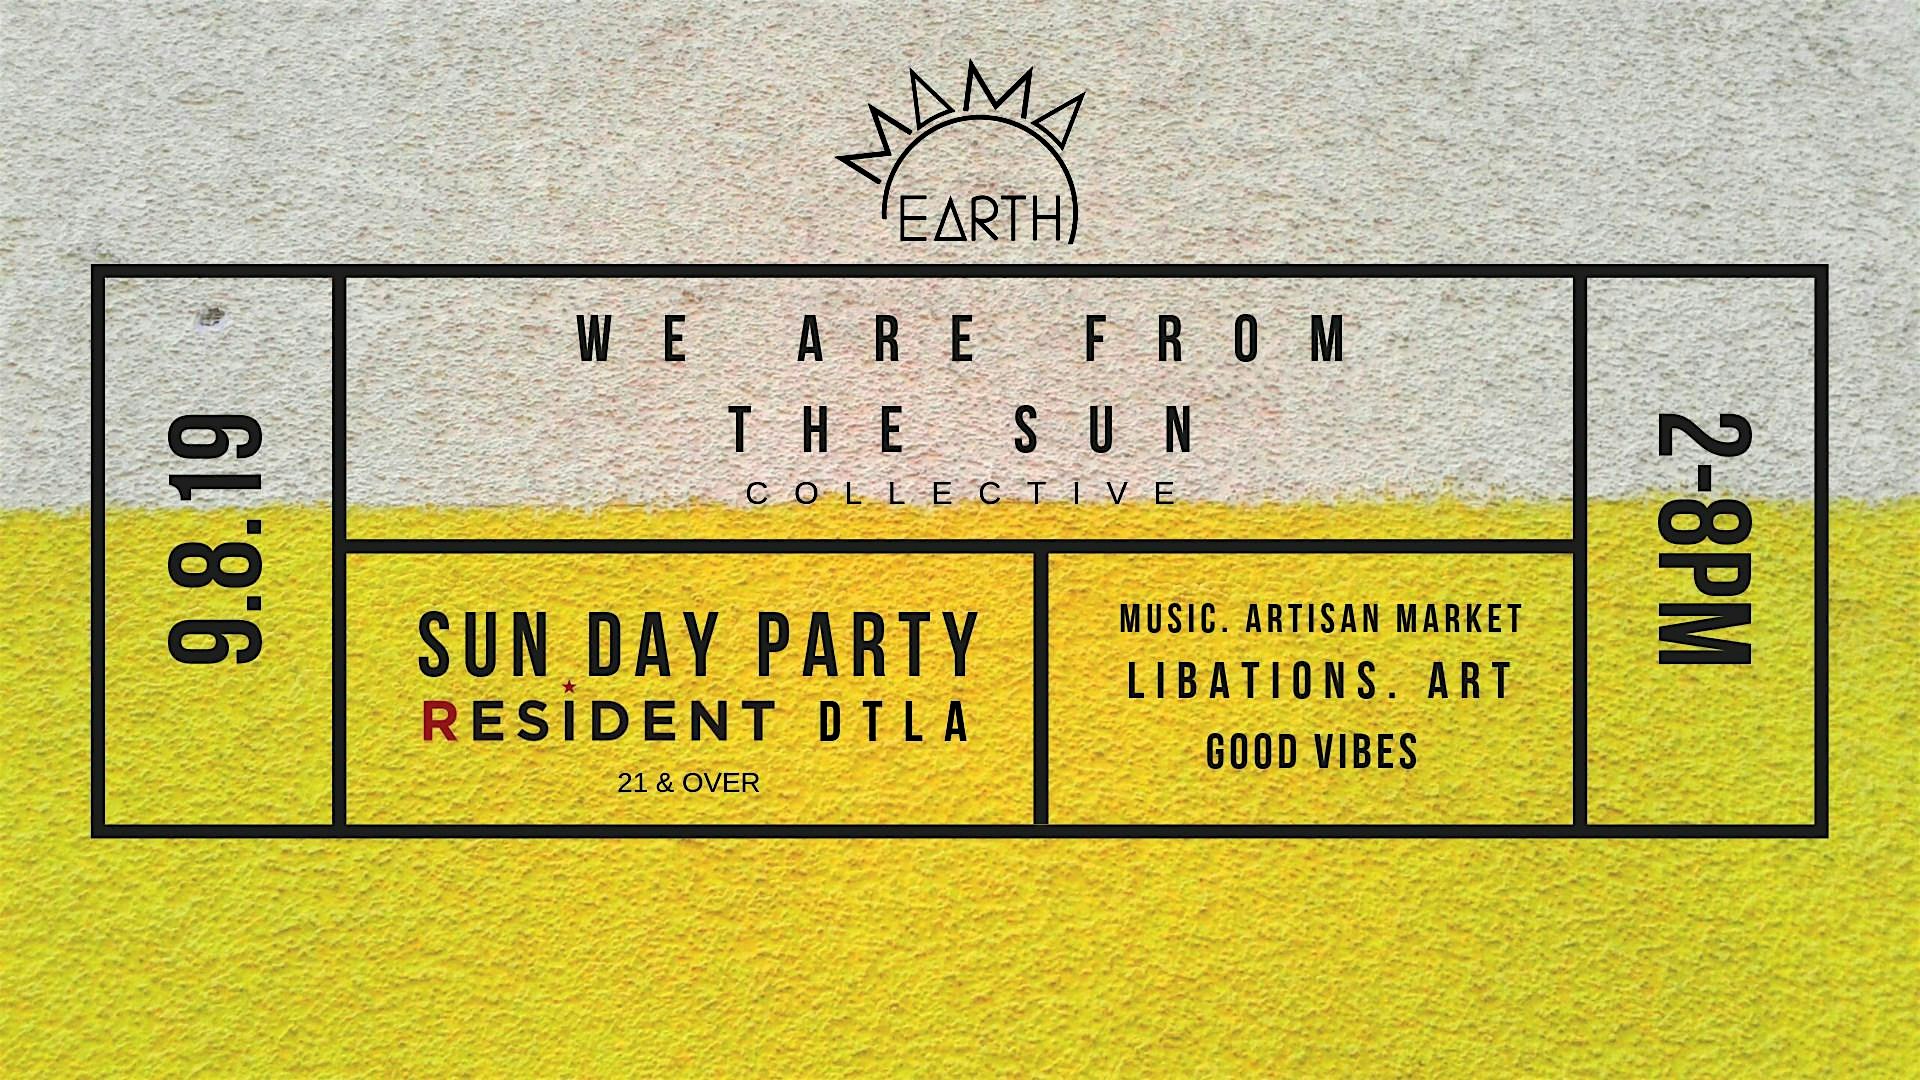 We Are From The Sun Day Party